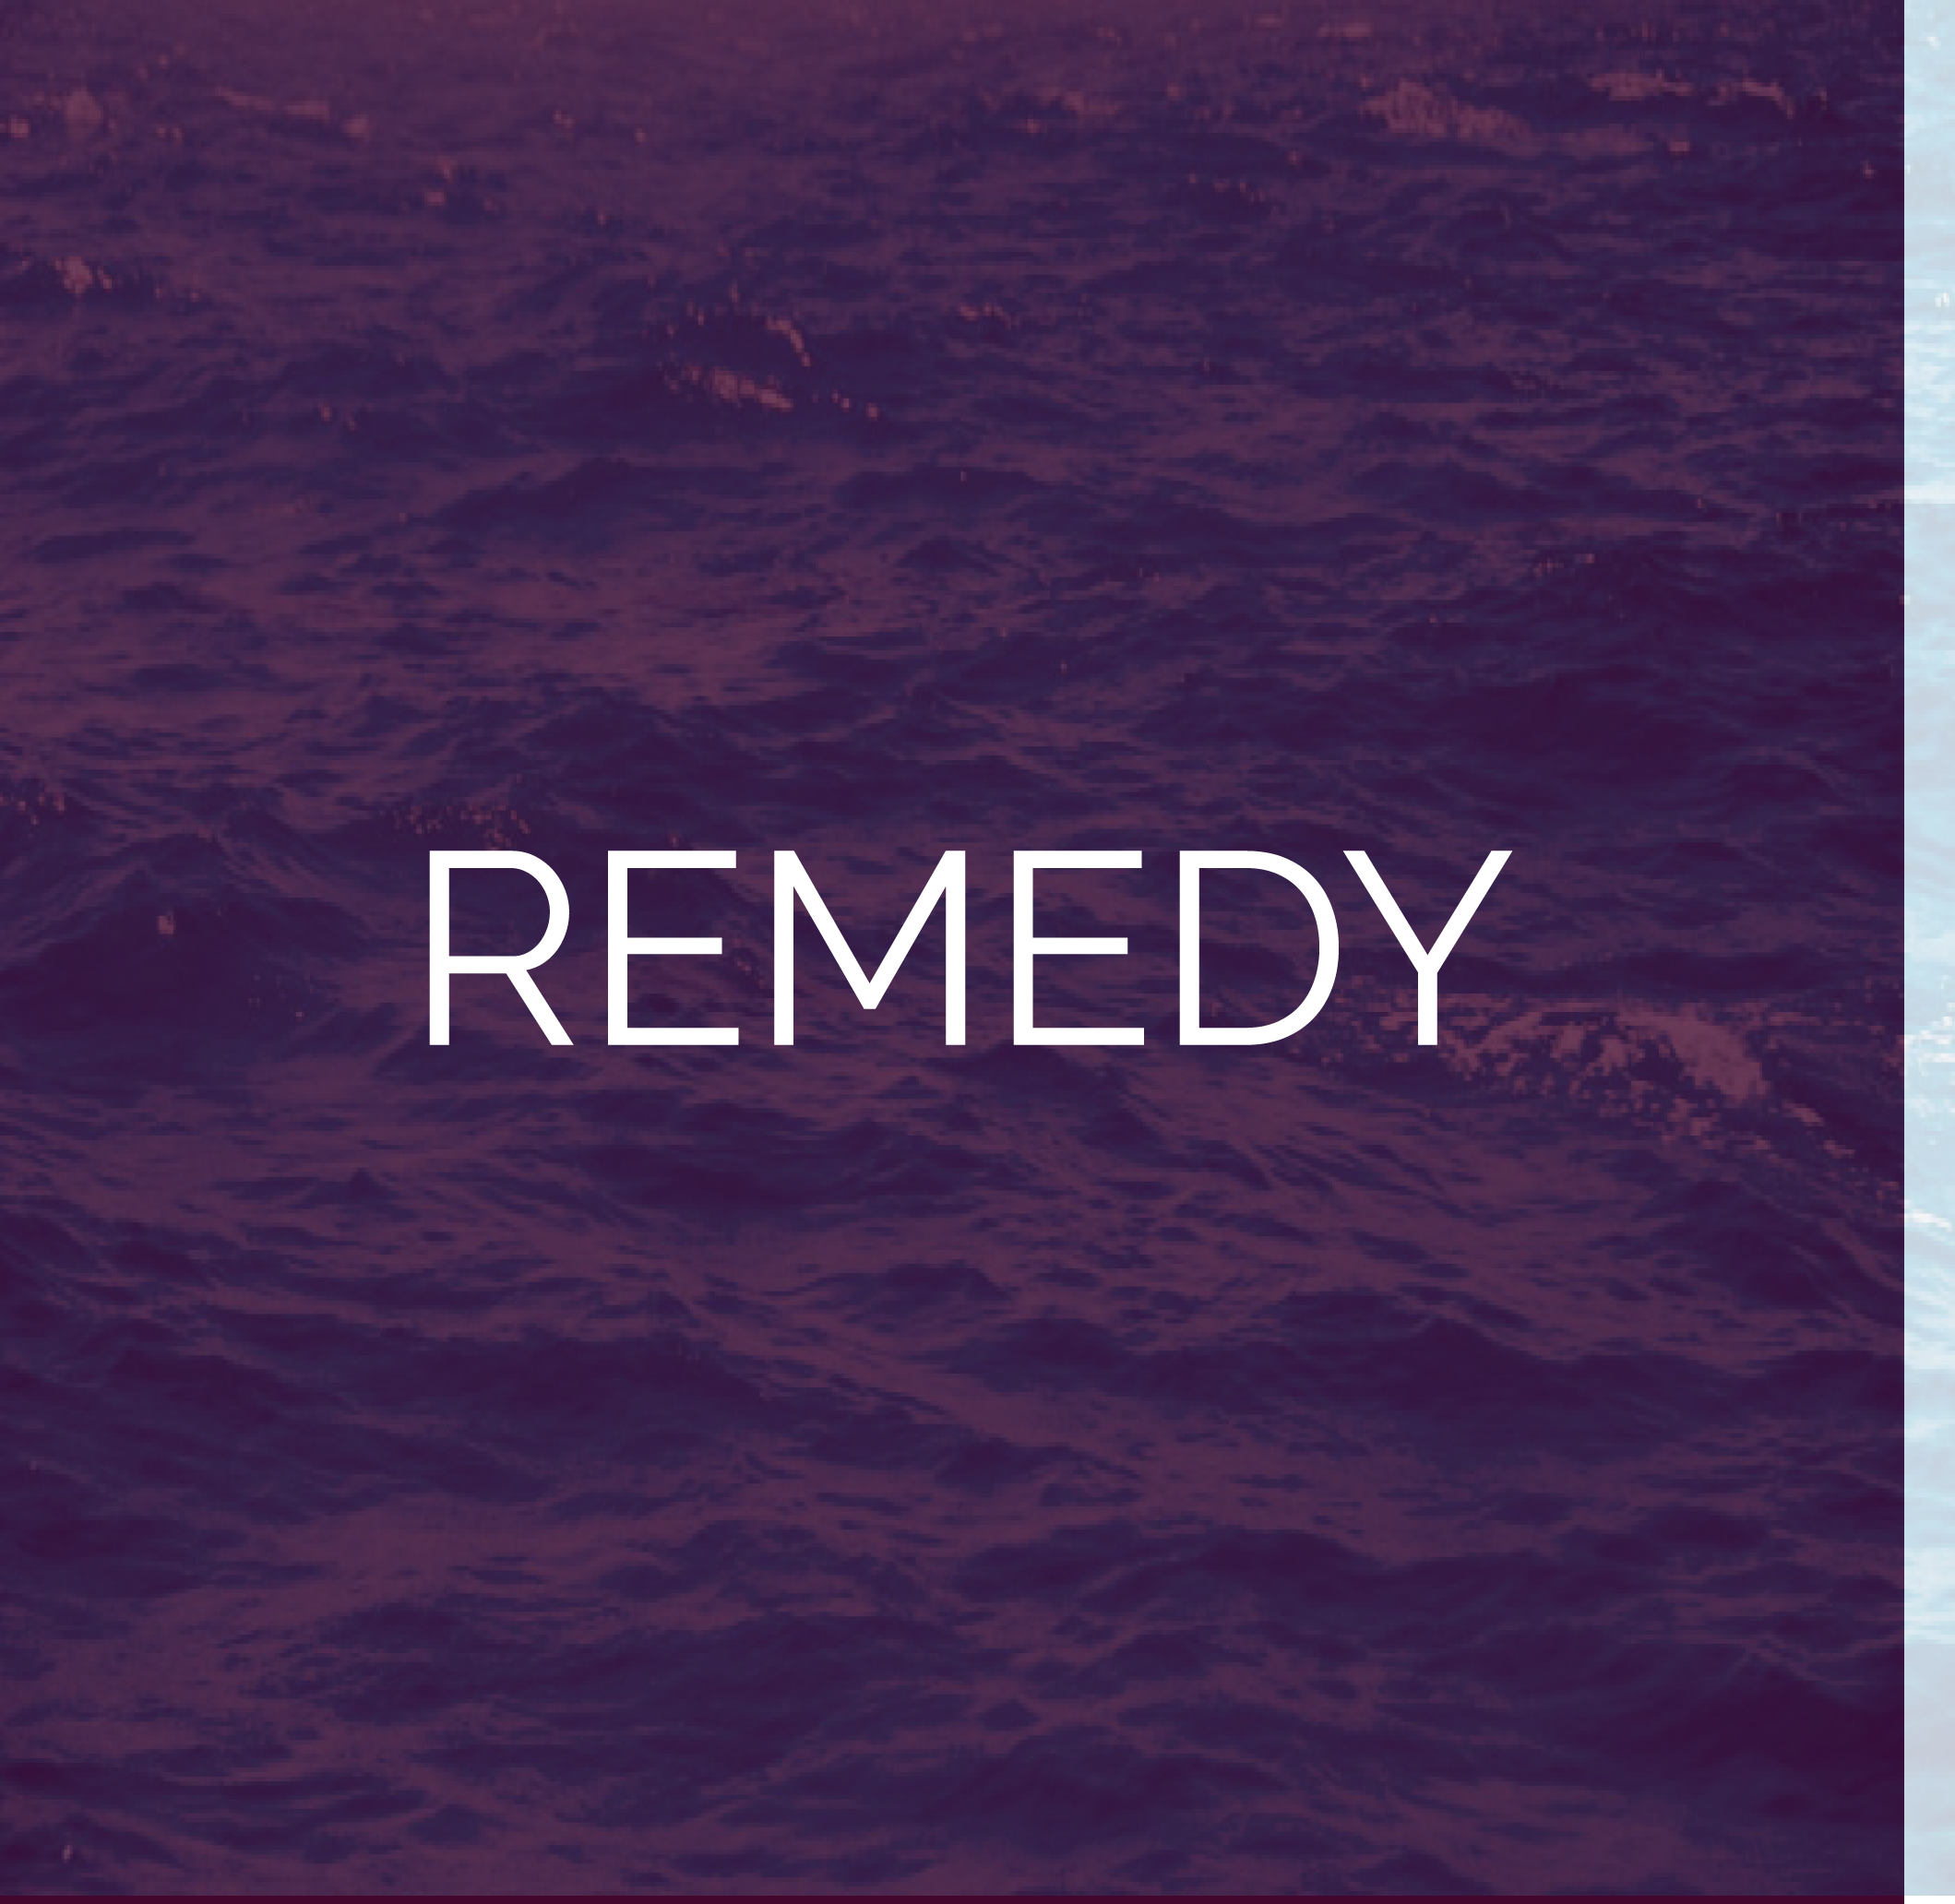 An icon representing Remedy